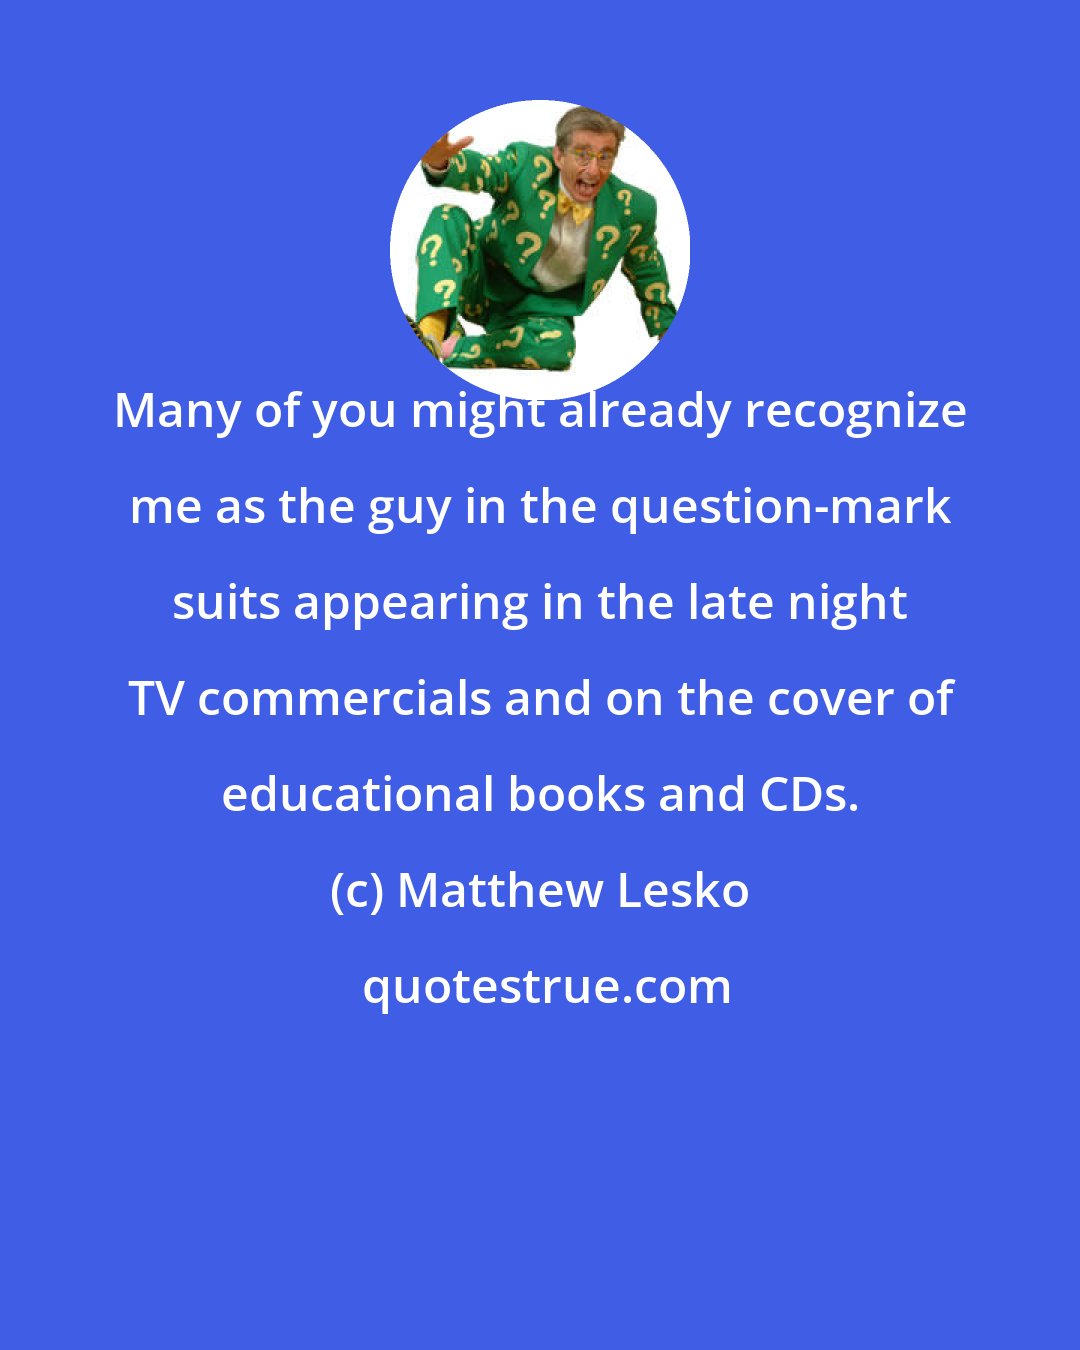 Matthew Lesko: Many of you might already recognize me as the guy in the question-mark suits appearing in the late night TV commercials and on the cover of educational books and CDs.